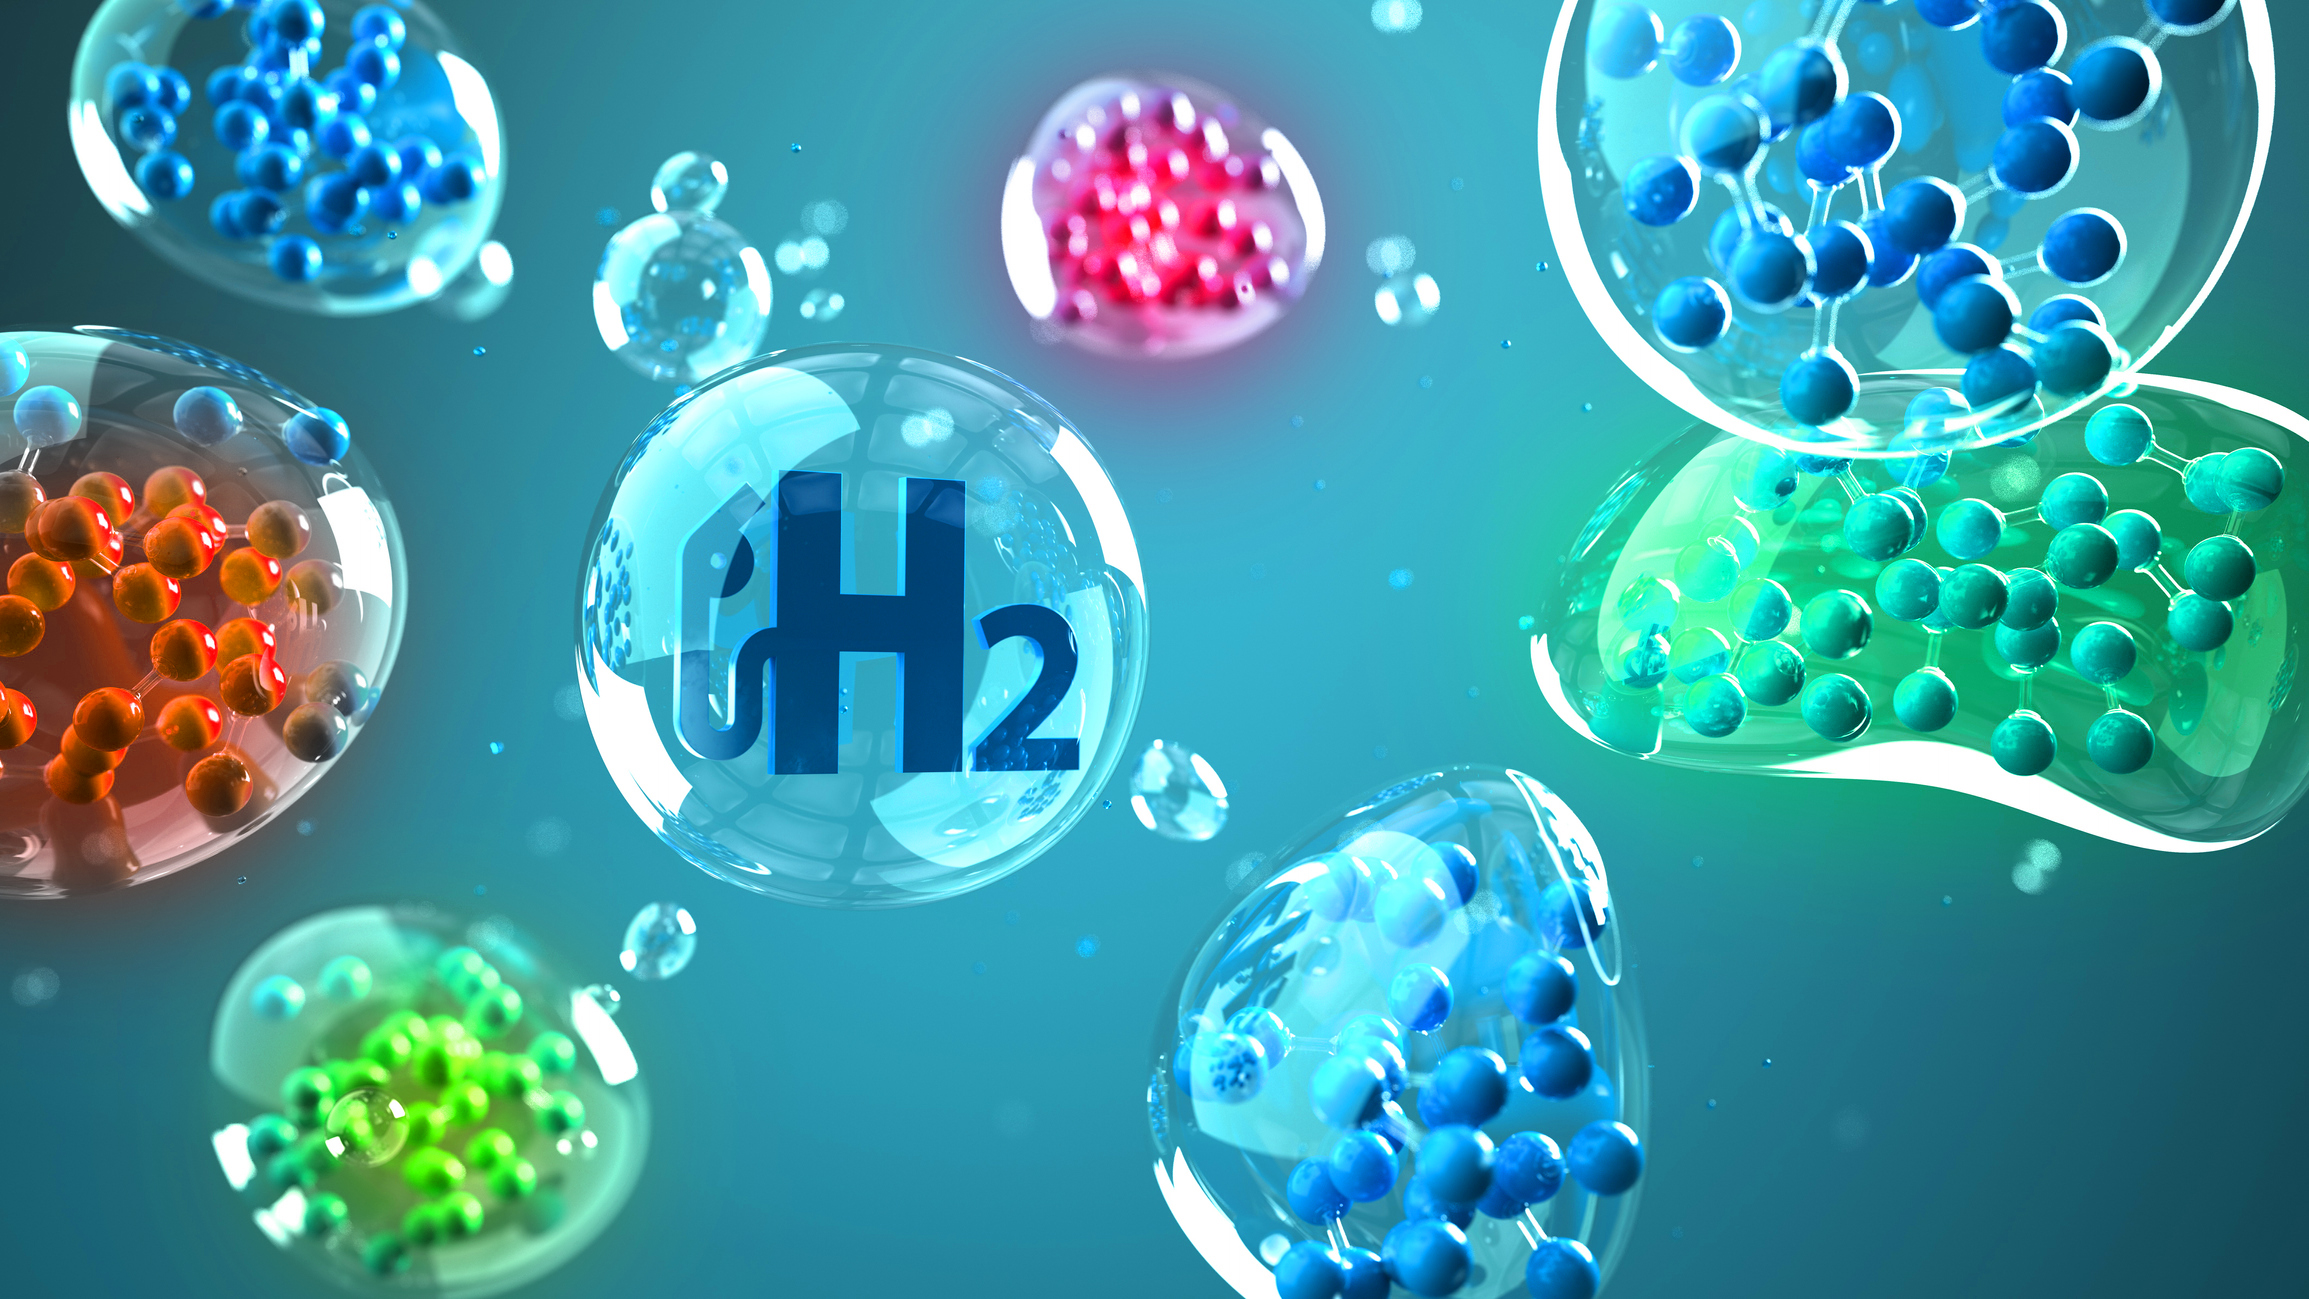 The hydrogen rainbow concept: differently colored strings of molecules surround a bubble with an H₂ fuel pump icon.